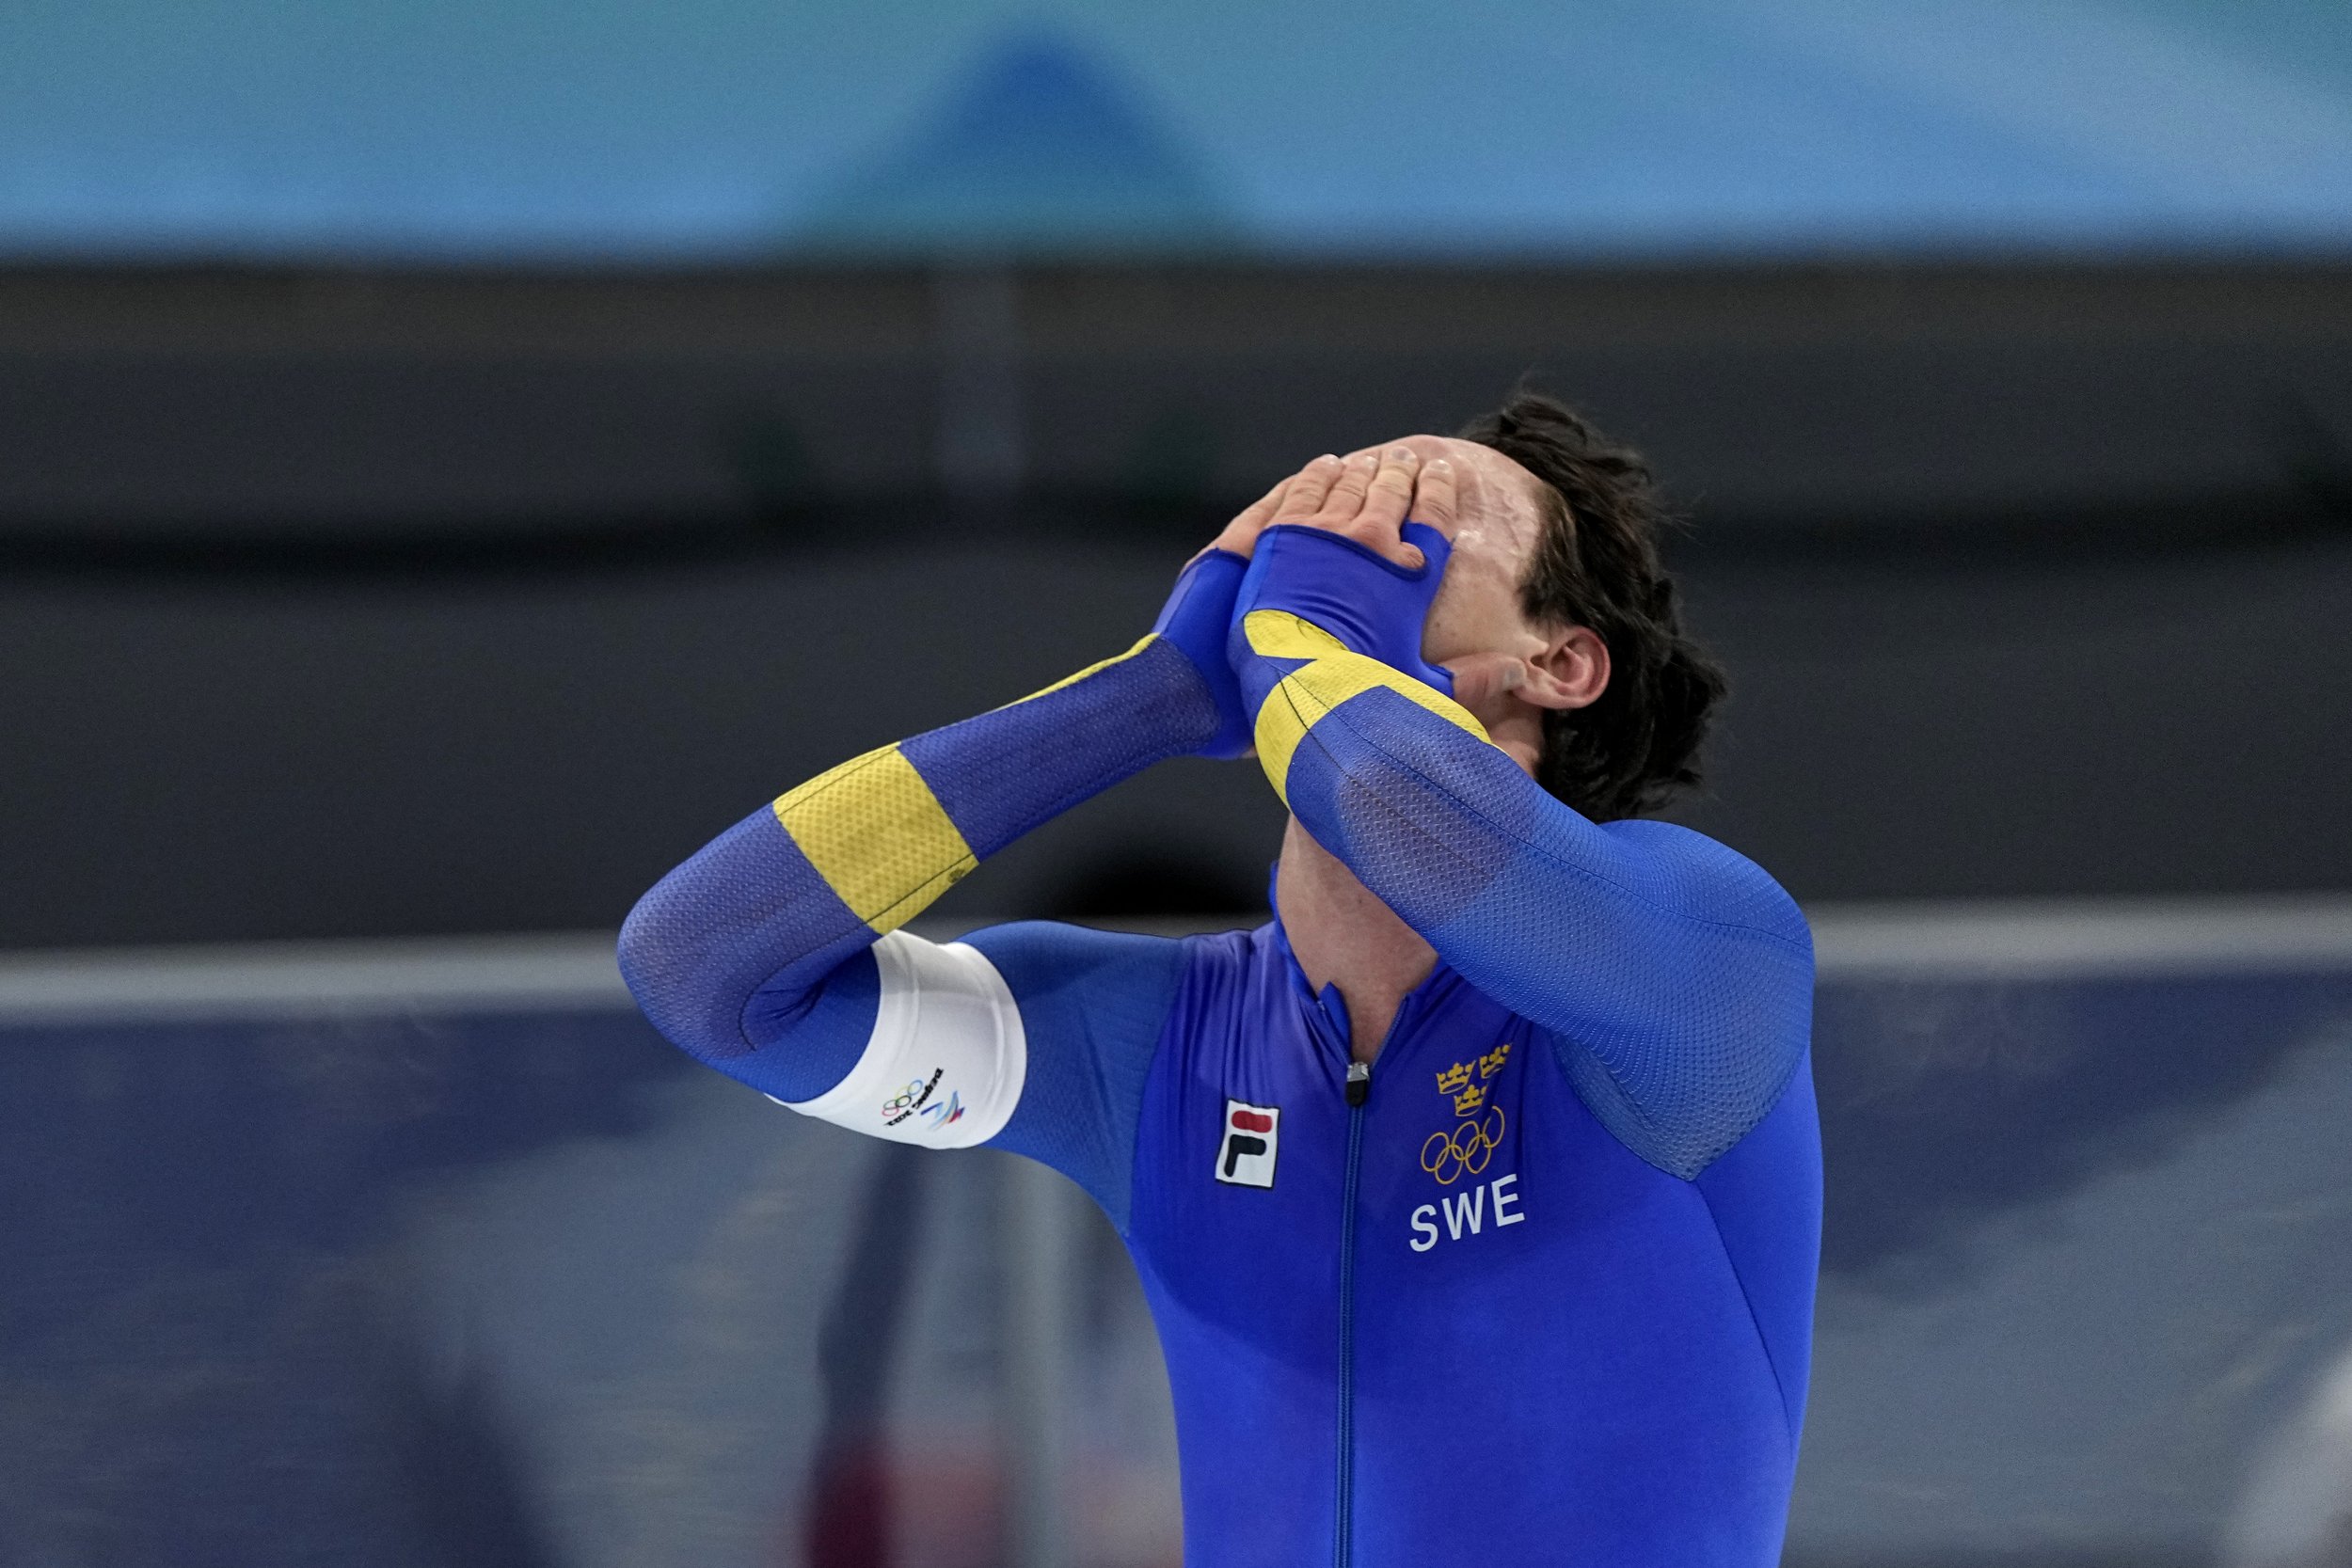  Nils van der Poel of Sweden celebrates after winning the gold medal and setting an Olympic record in the men's speedskating 5,000-meter race at the 2022 Winter Olympics, Sunday, Feb. 6, 2022, in Beijing. (AP Photo/Ashley Landis) 